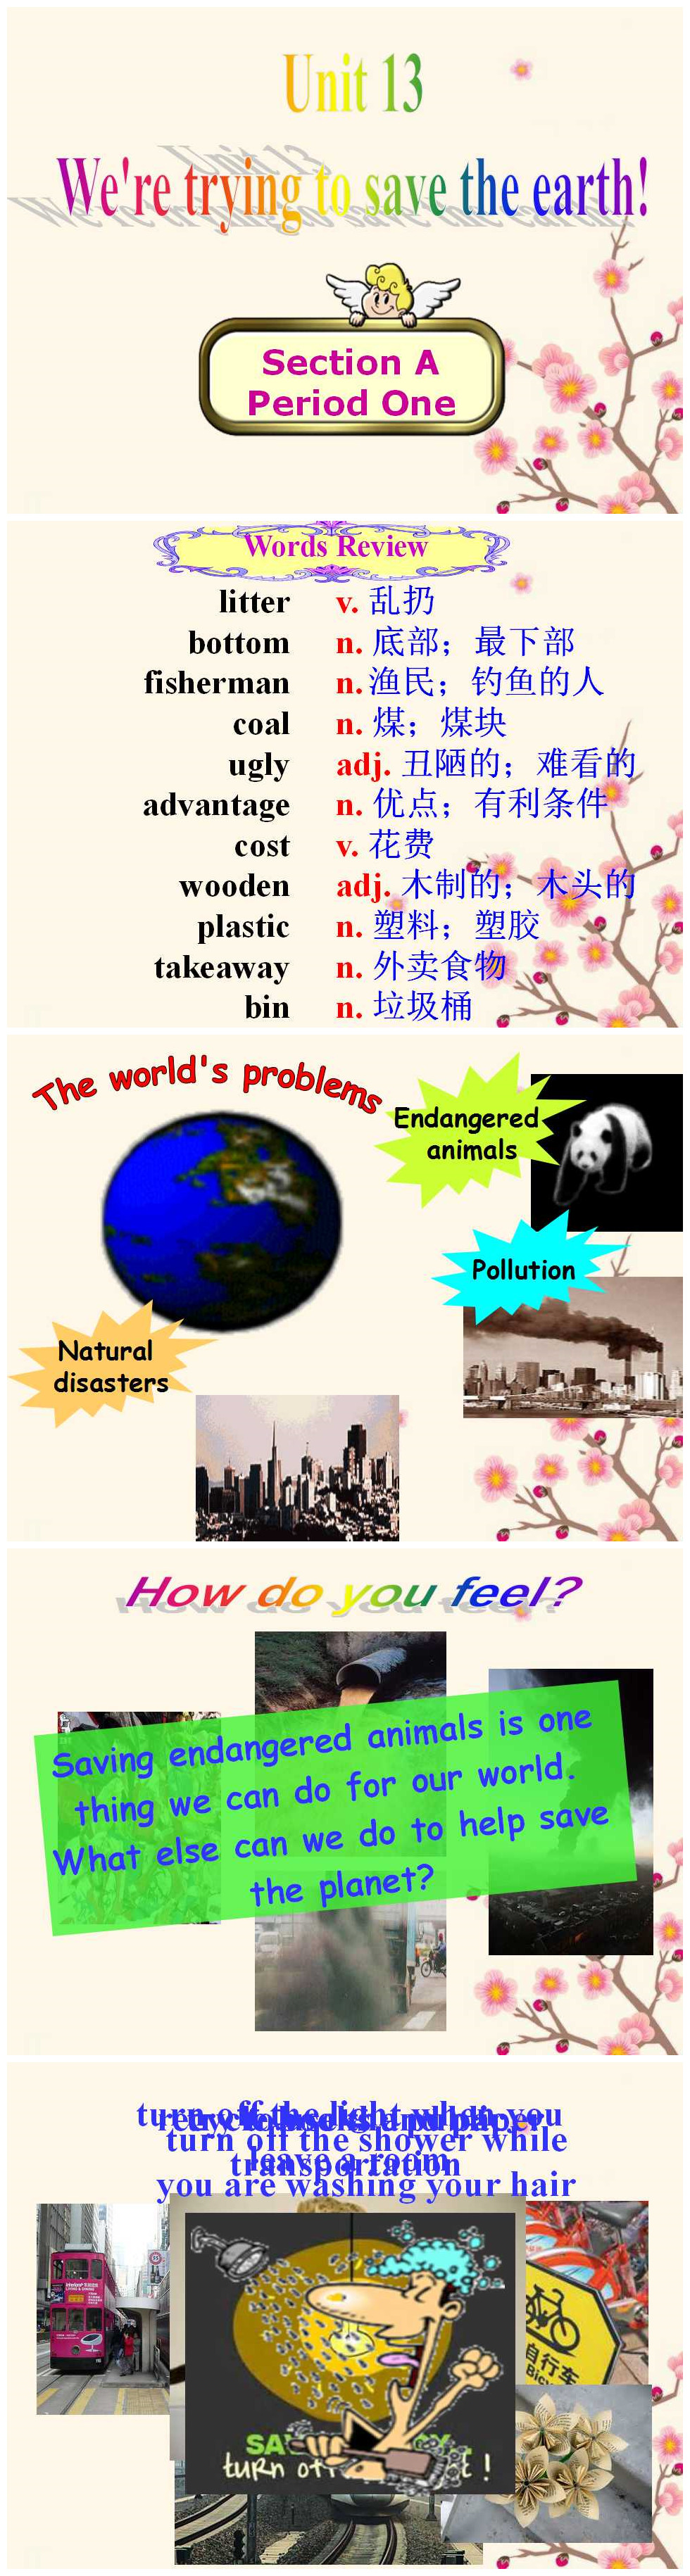 《We're trying to save the earth!》PPT课件6PPT课件下载